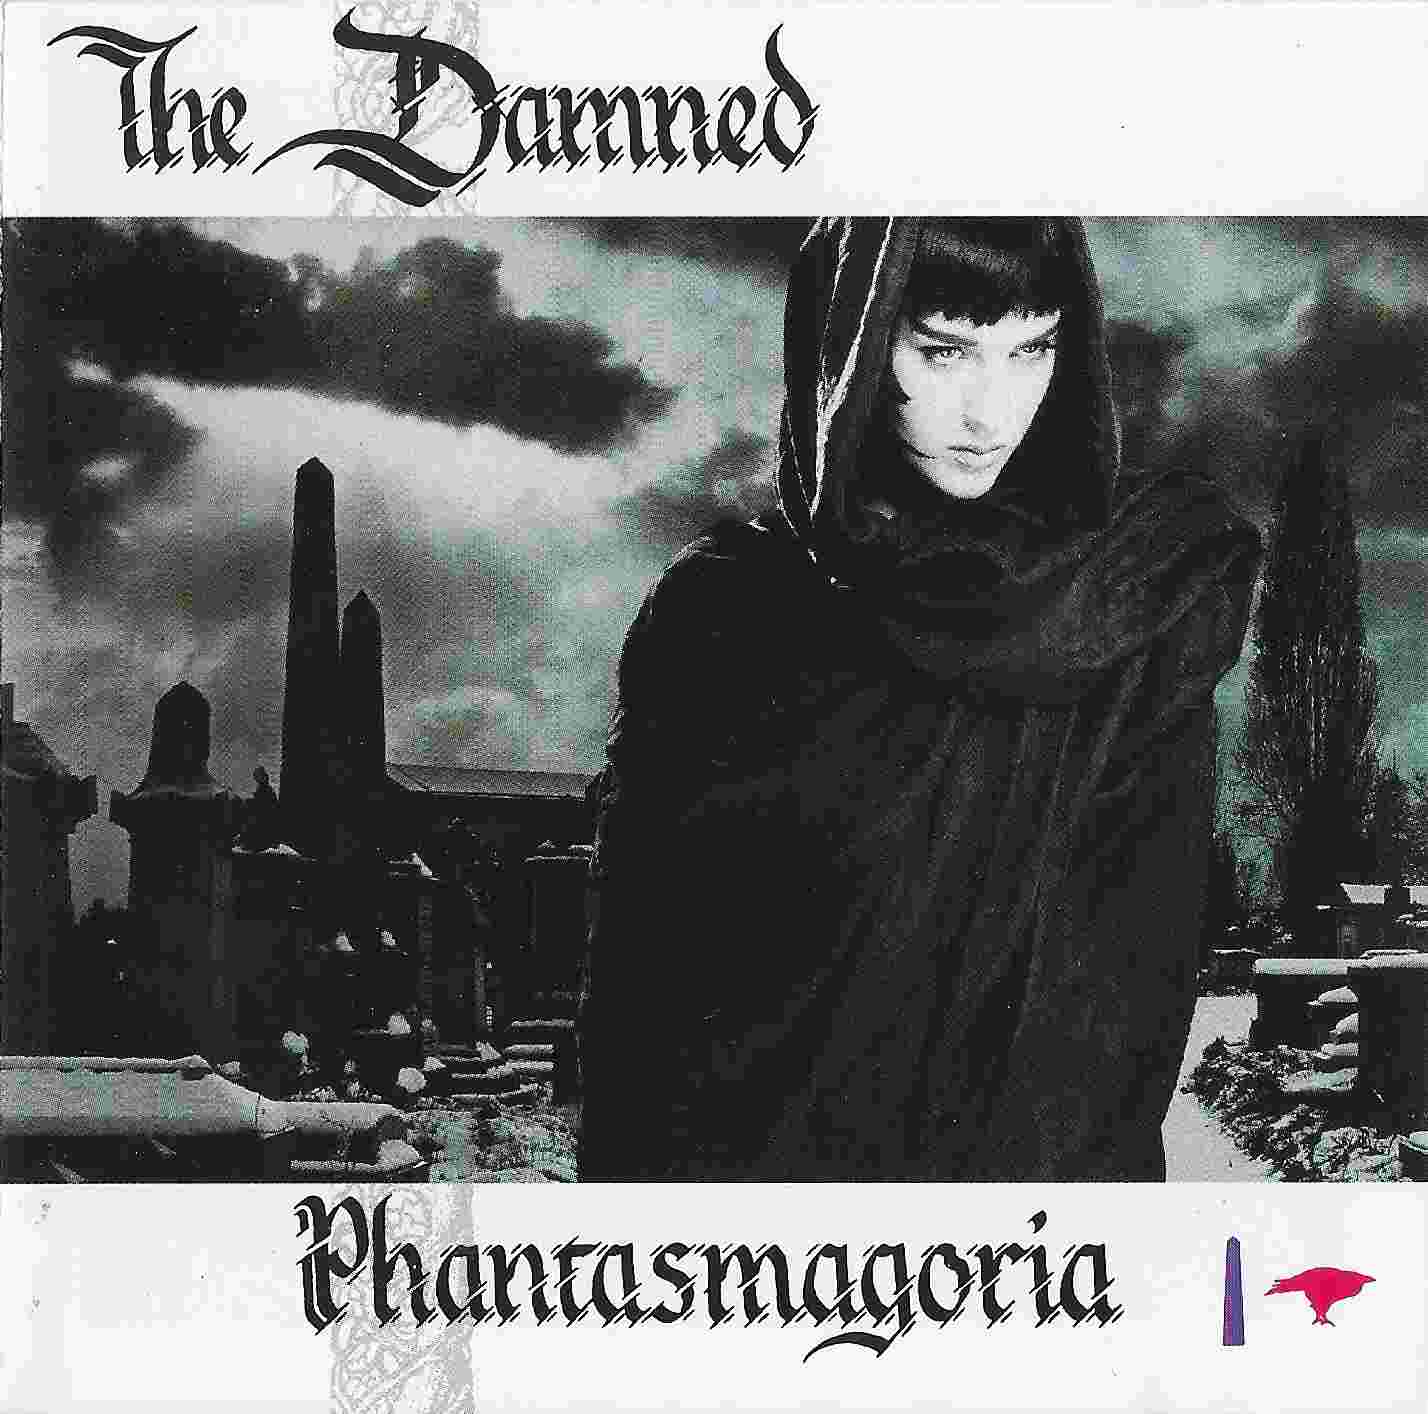 Picture of DMCL 1887 Phantasmagoria by artist The Damned